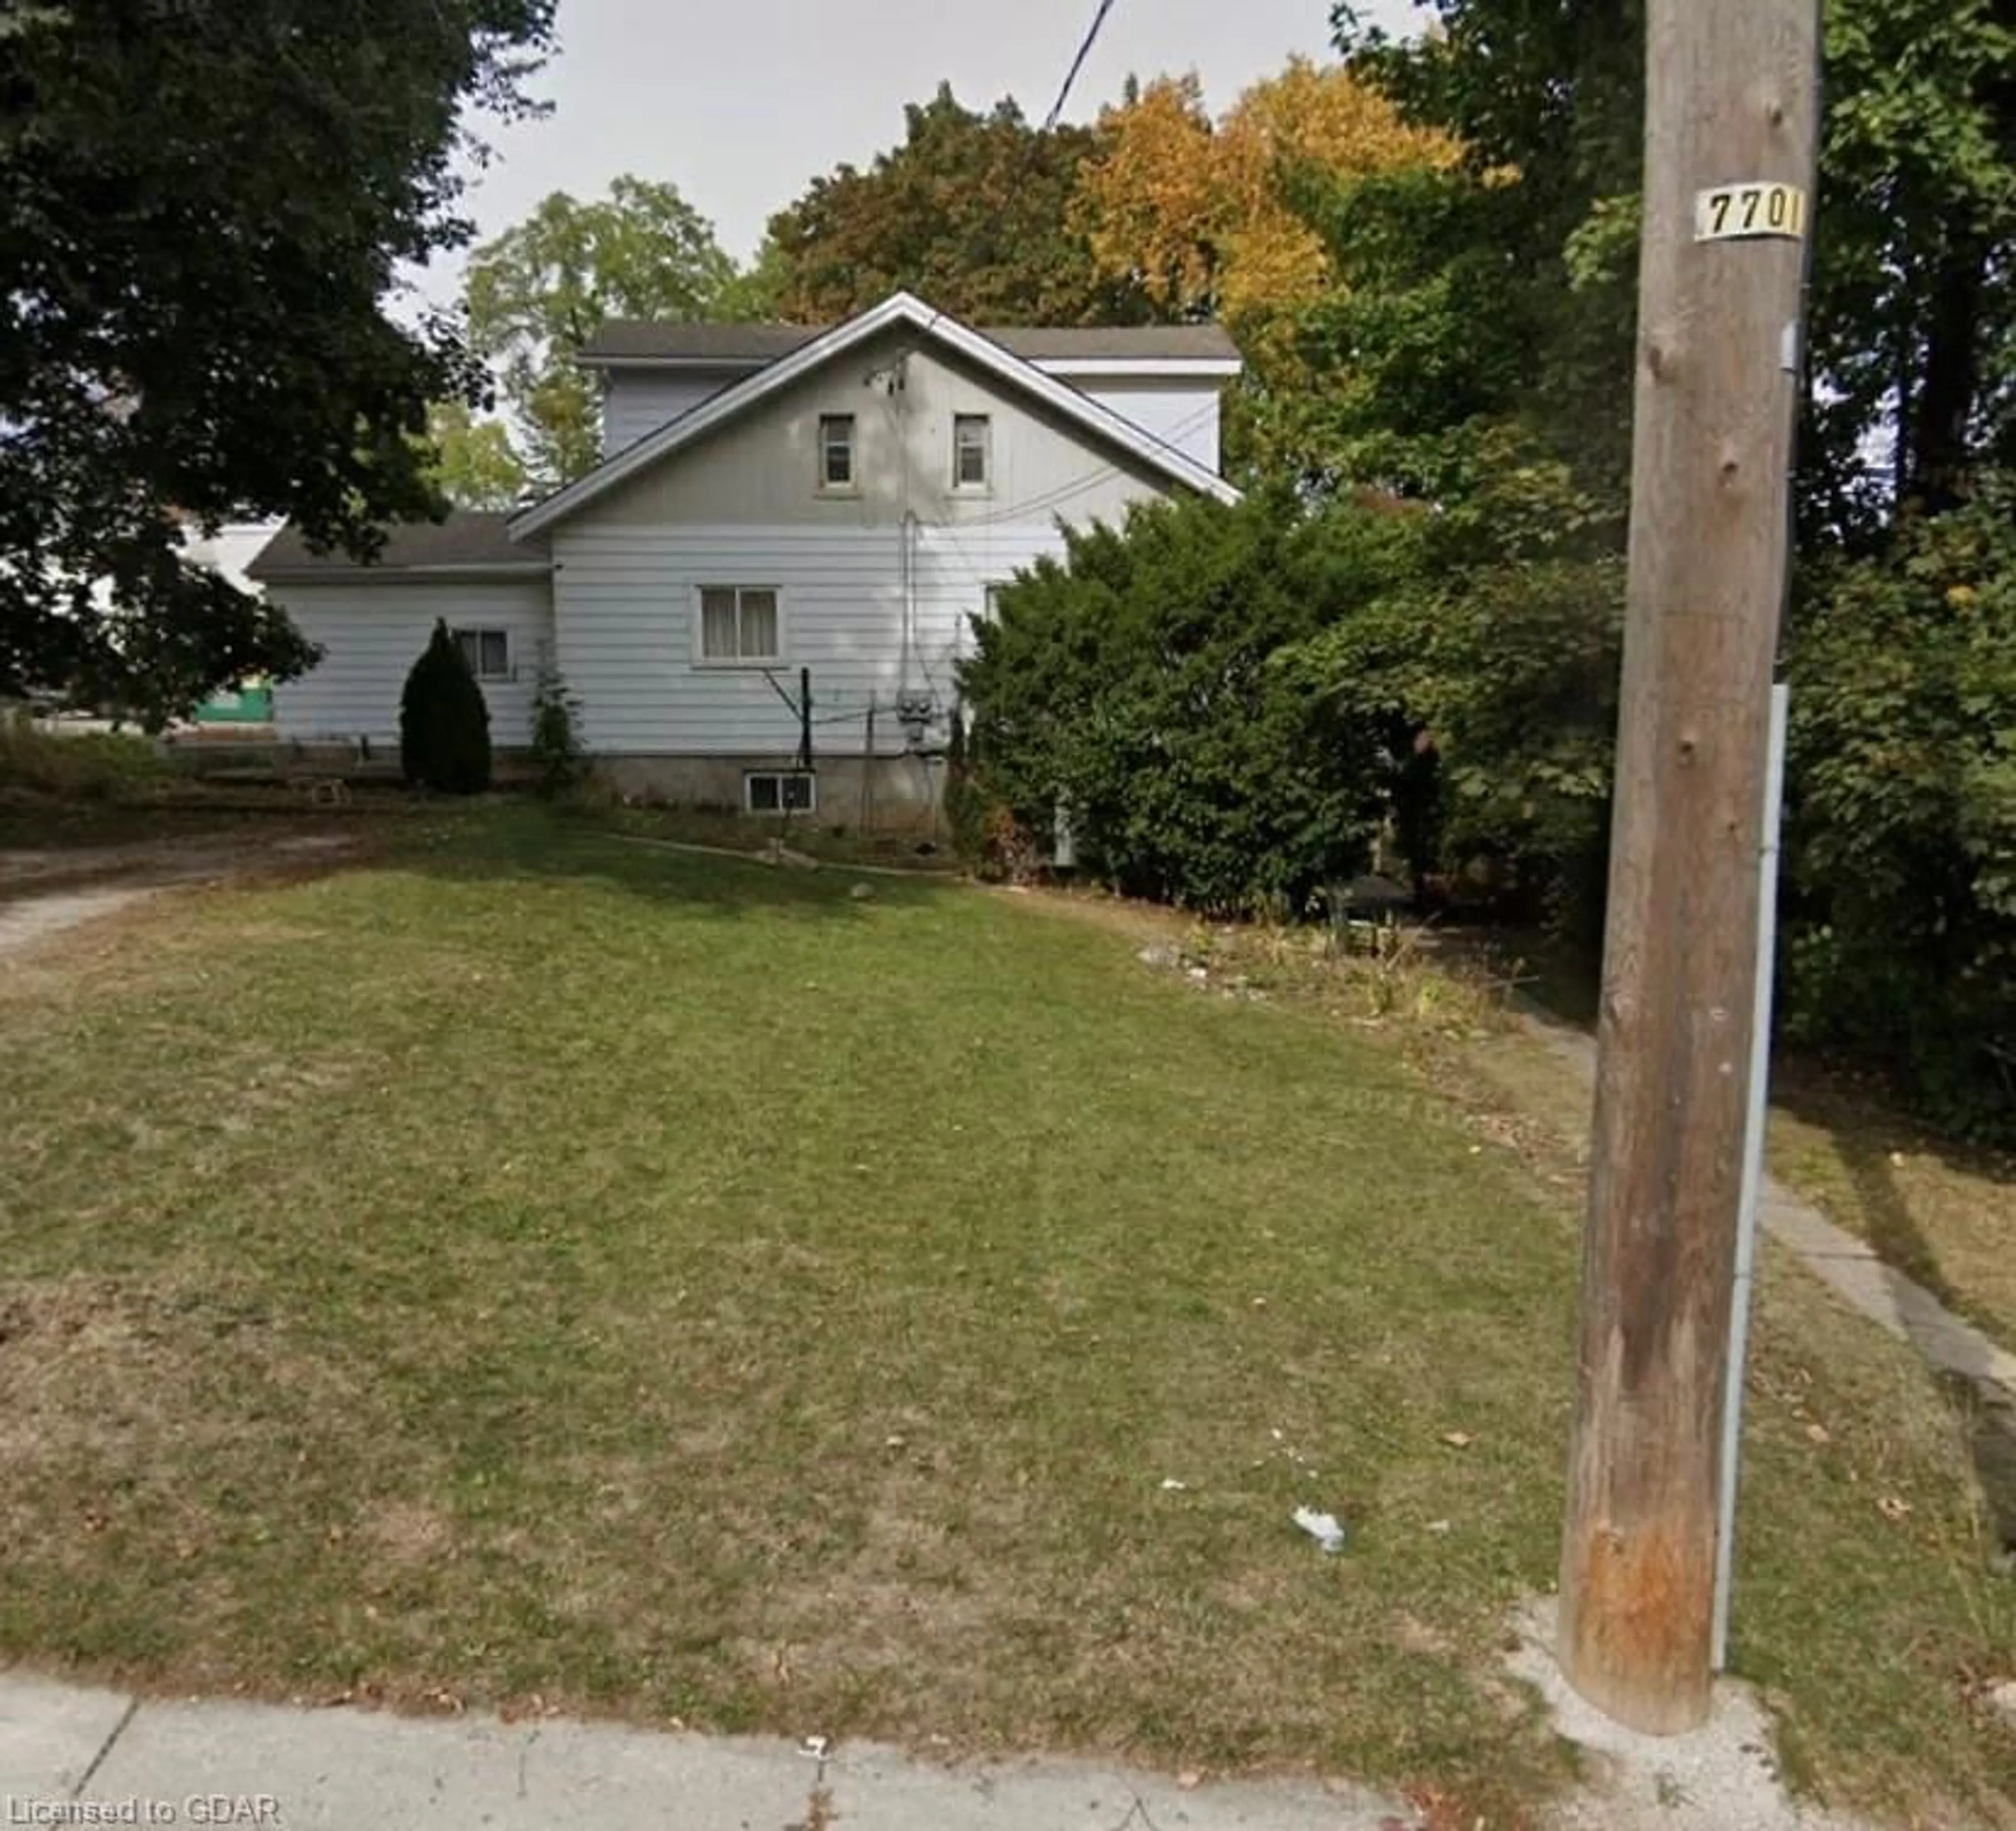 Street view for 22 Kerr St, Guelph Ontario N1H 1Z2